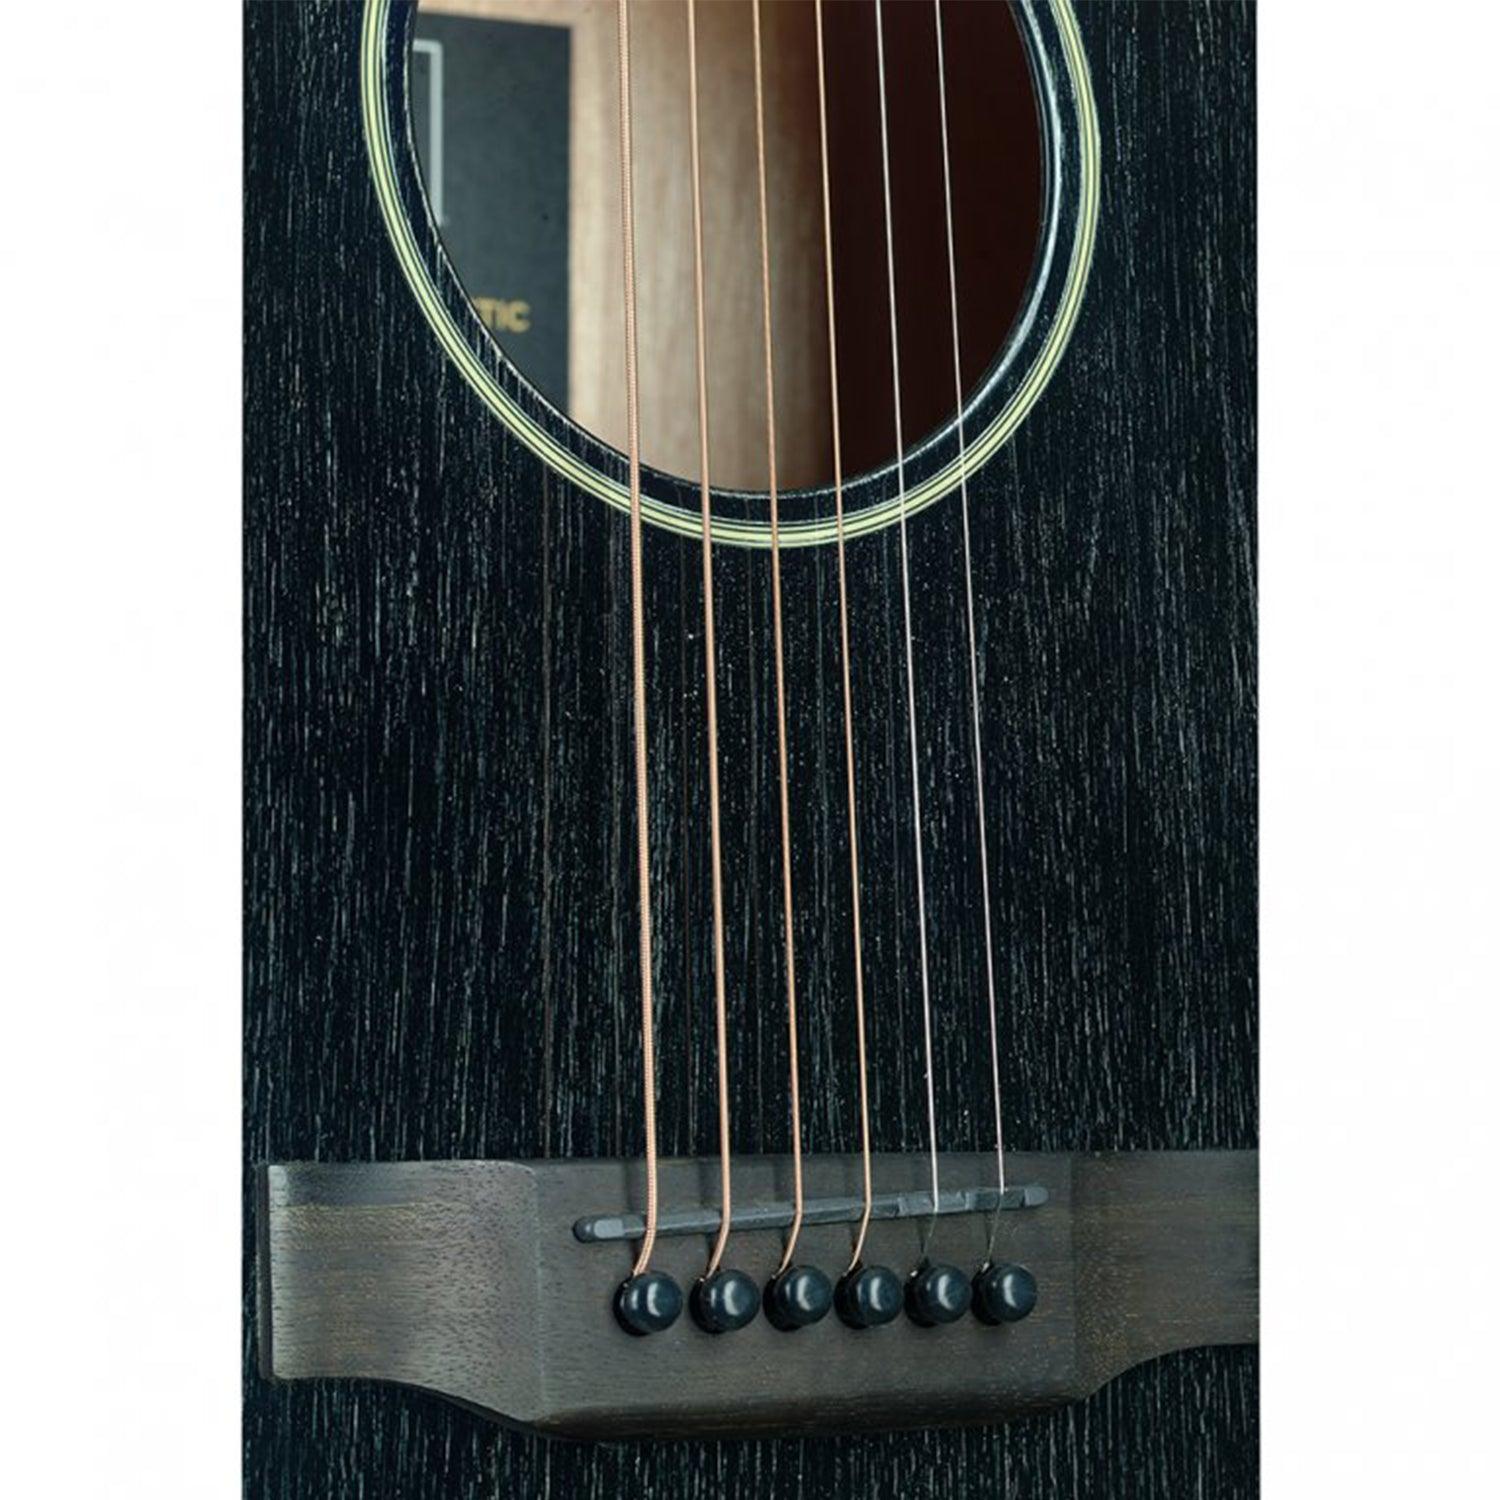 J.N.Guitars YAK-A Acoustic Auditorium Guitar with Solid Mahogany Top, Yakisugi series - DY Pro Audio